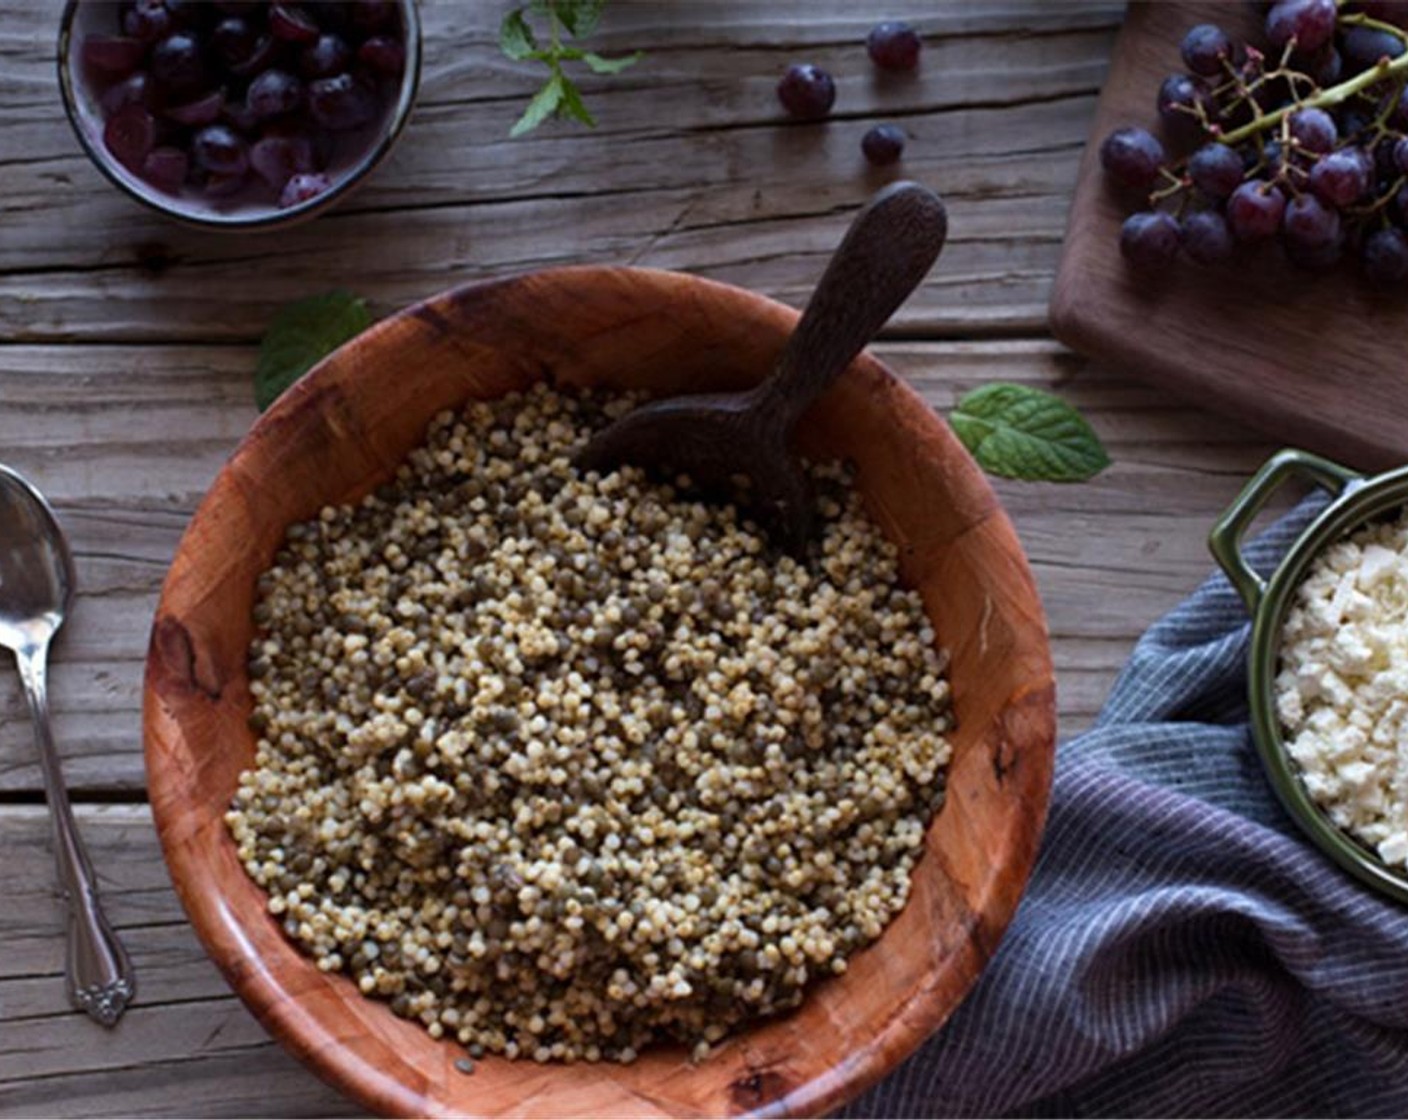 step 1 Place Whole Grain Sorghum (1 cup) in a pot and add 3 cups of water. Bring it to a boil, cover, reduce the heat, and let it simmer for 55-60 minutes. Drain the excess liquid. Place it in a large bowl and set aside.